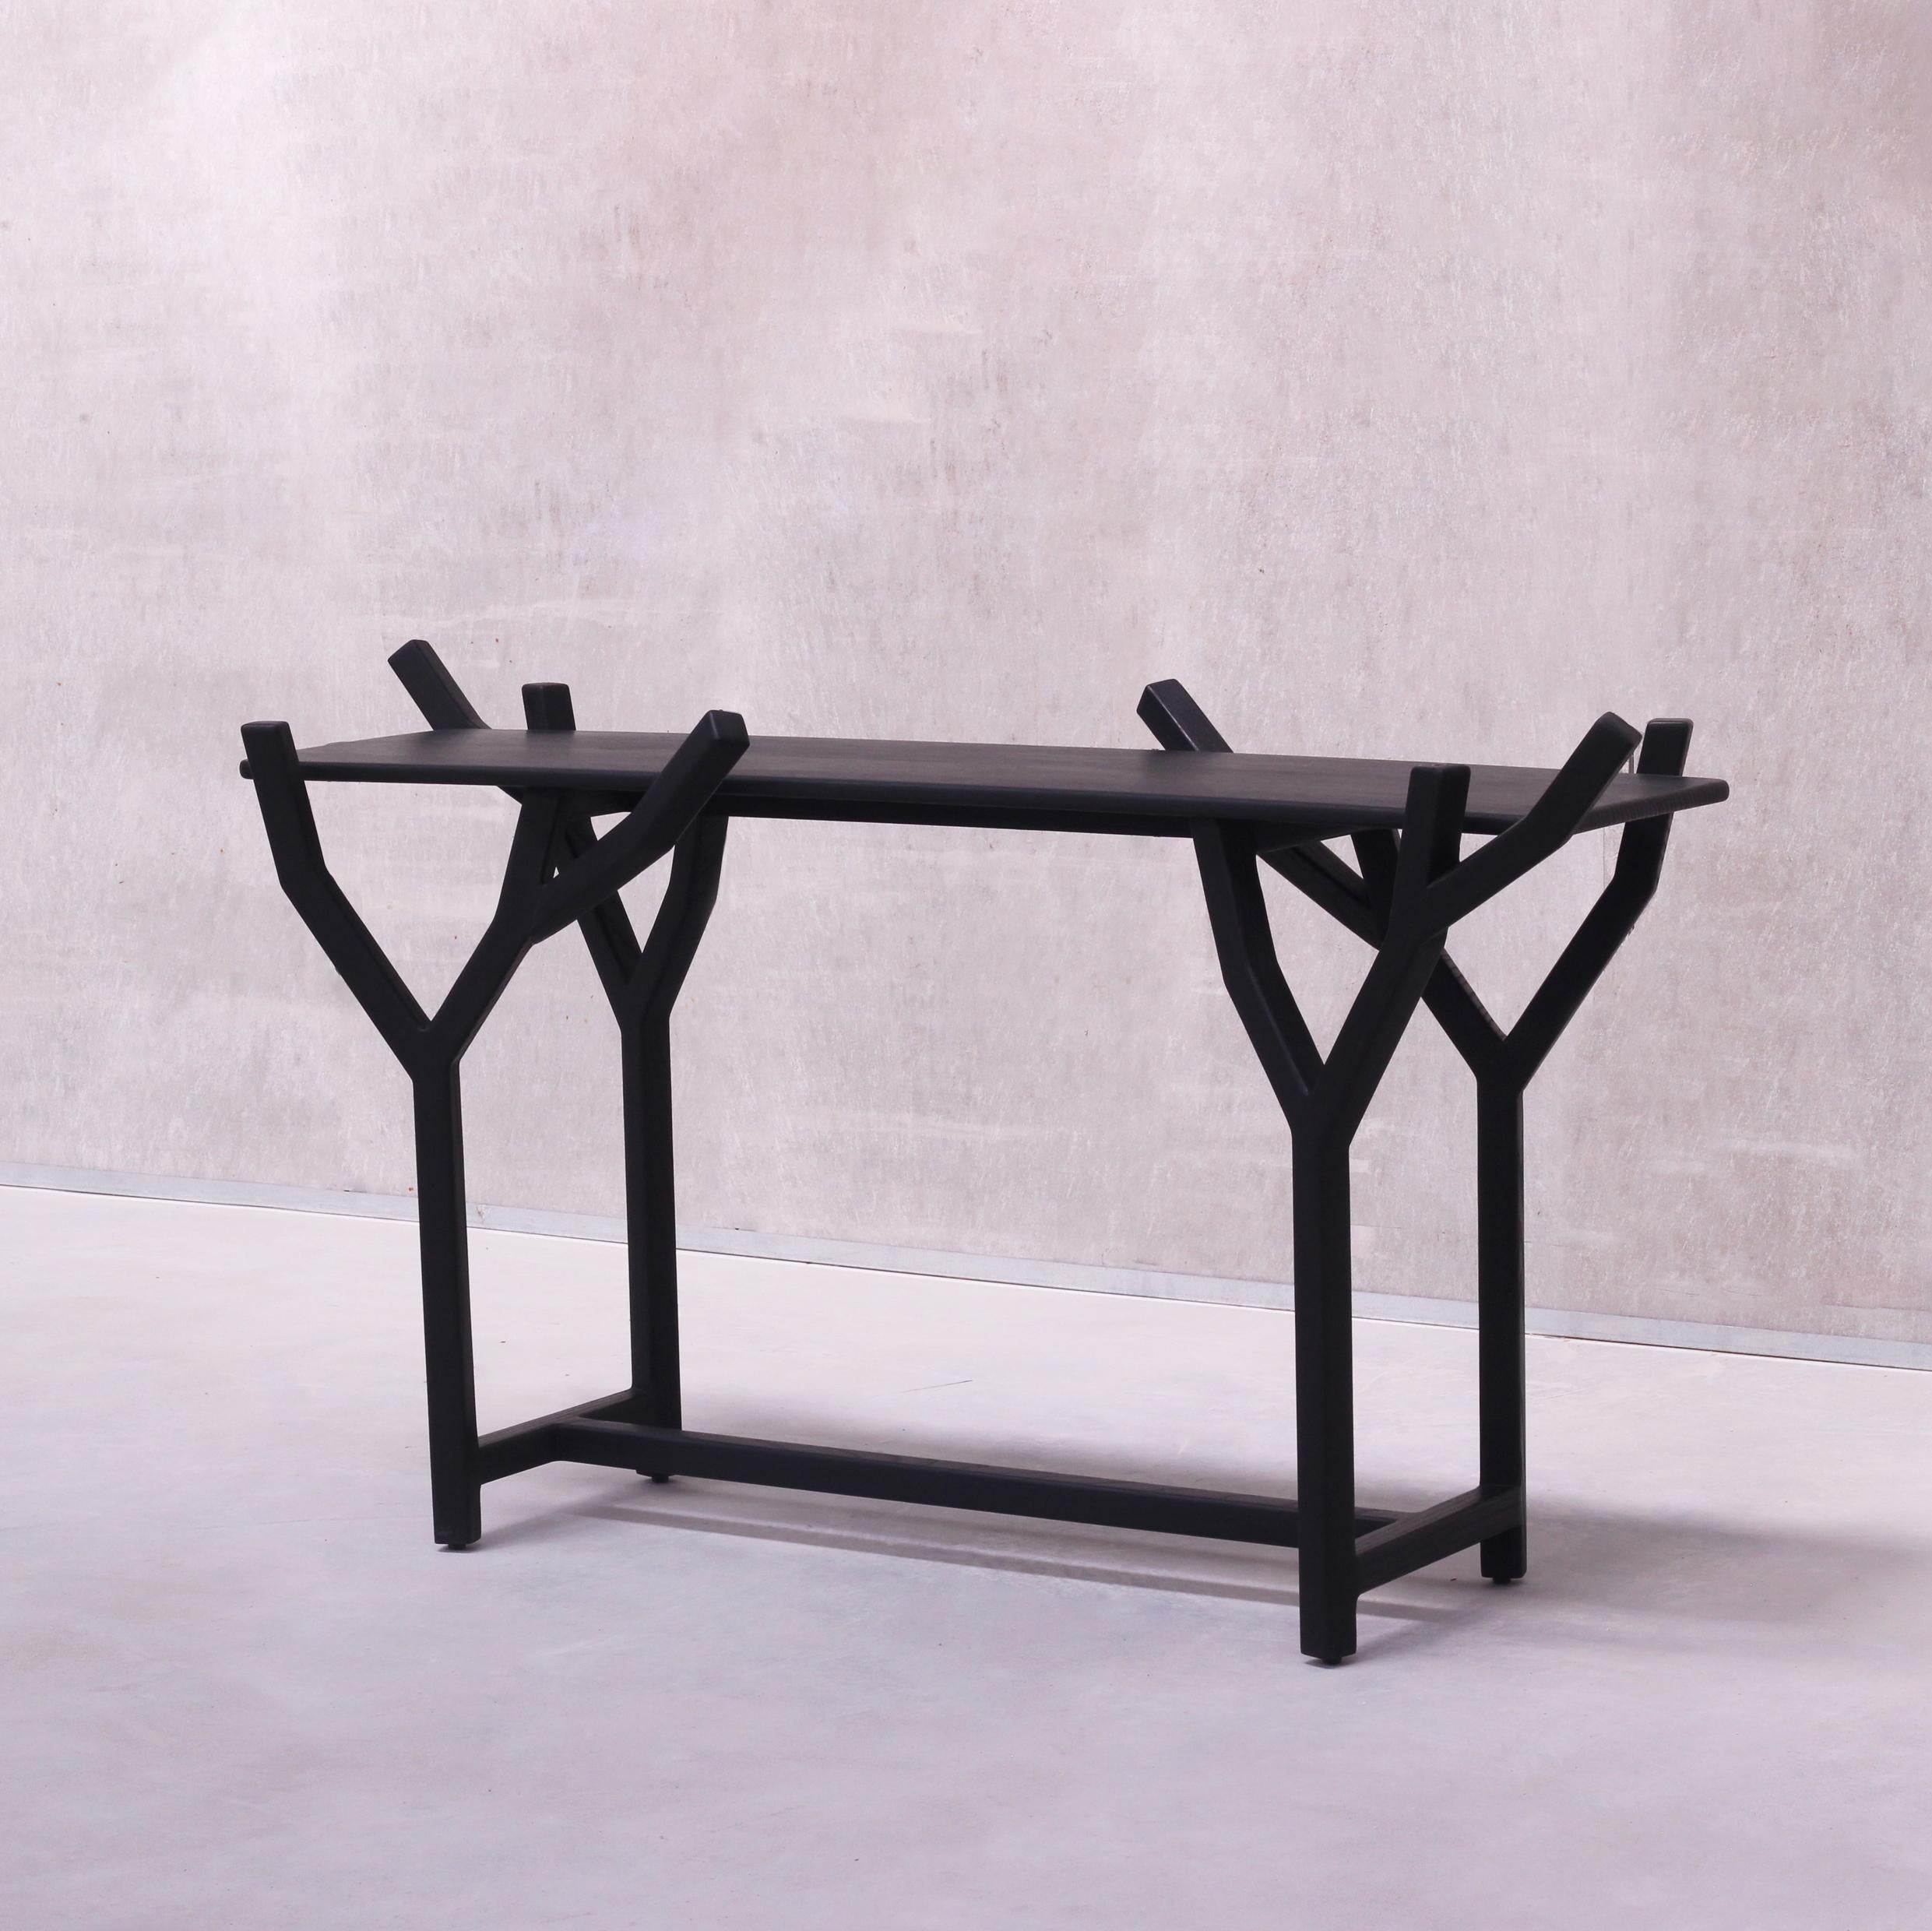 TOTEM is a sculptural and organic statement console table in Solid Oak wood, created inspired by the exemplary beauty and winding ascents of trees in nature, with an uncomplicated minimal aesthetic. The console table holds a complex construction in